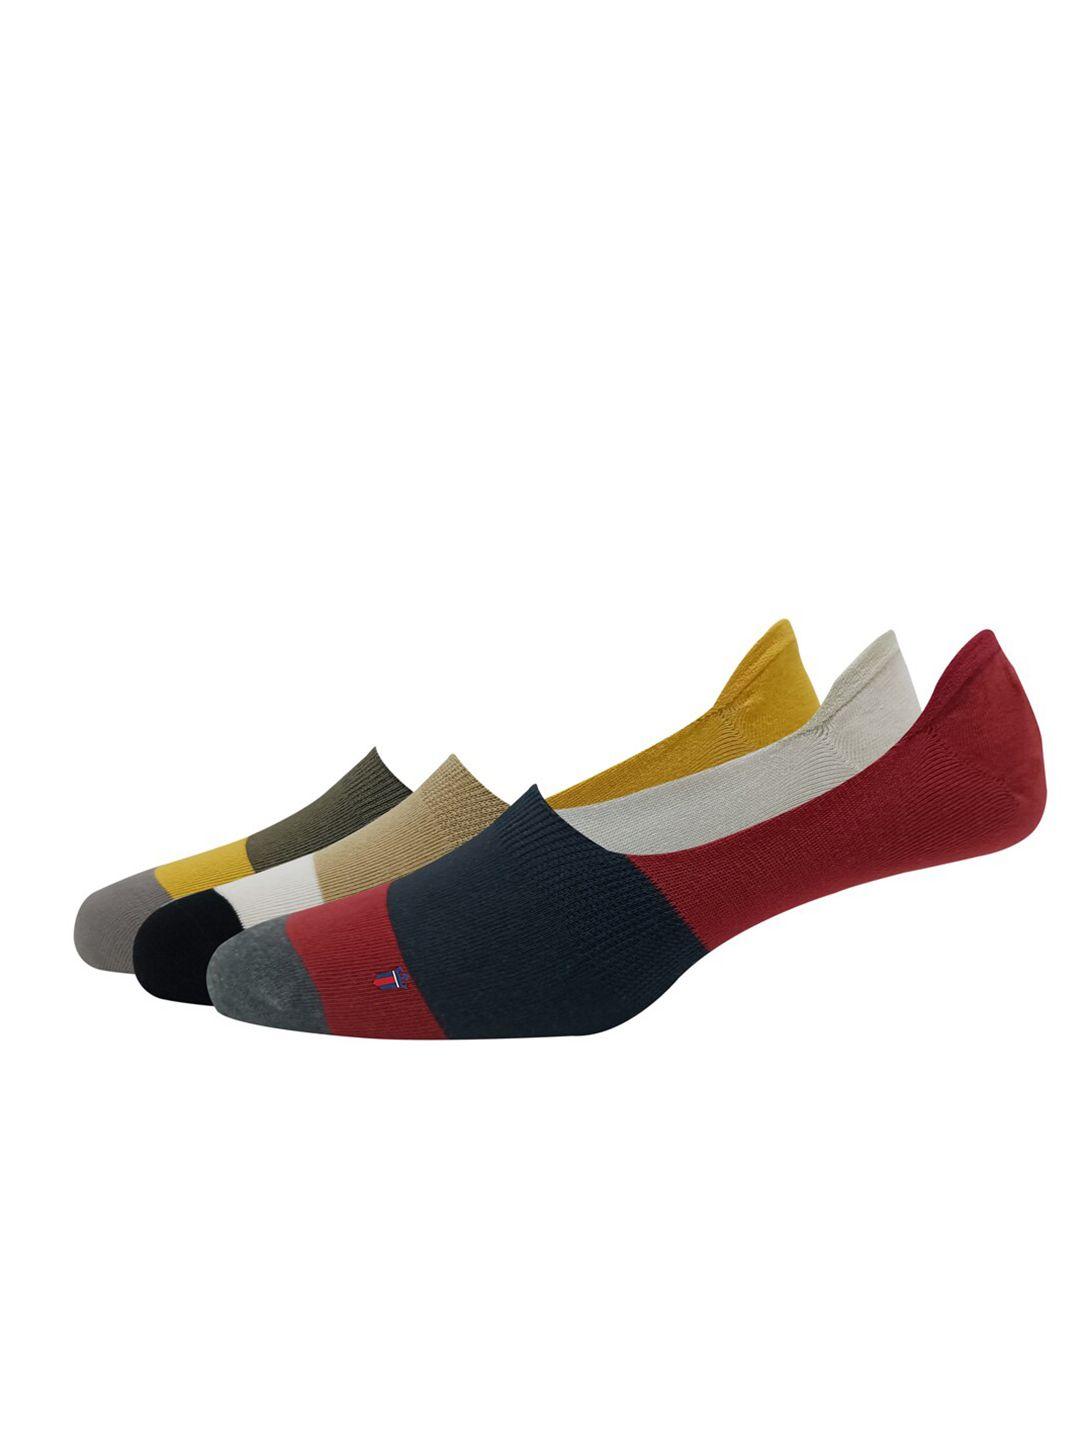 louis philippe pack of 3 colorblocked cotton shoe-liner socks